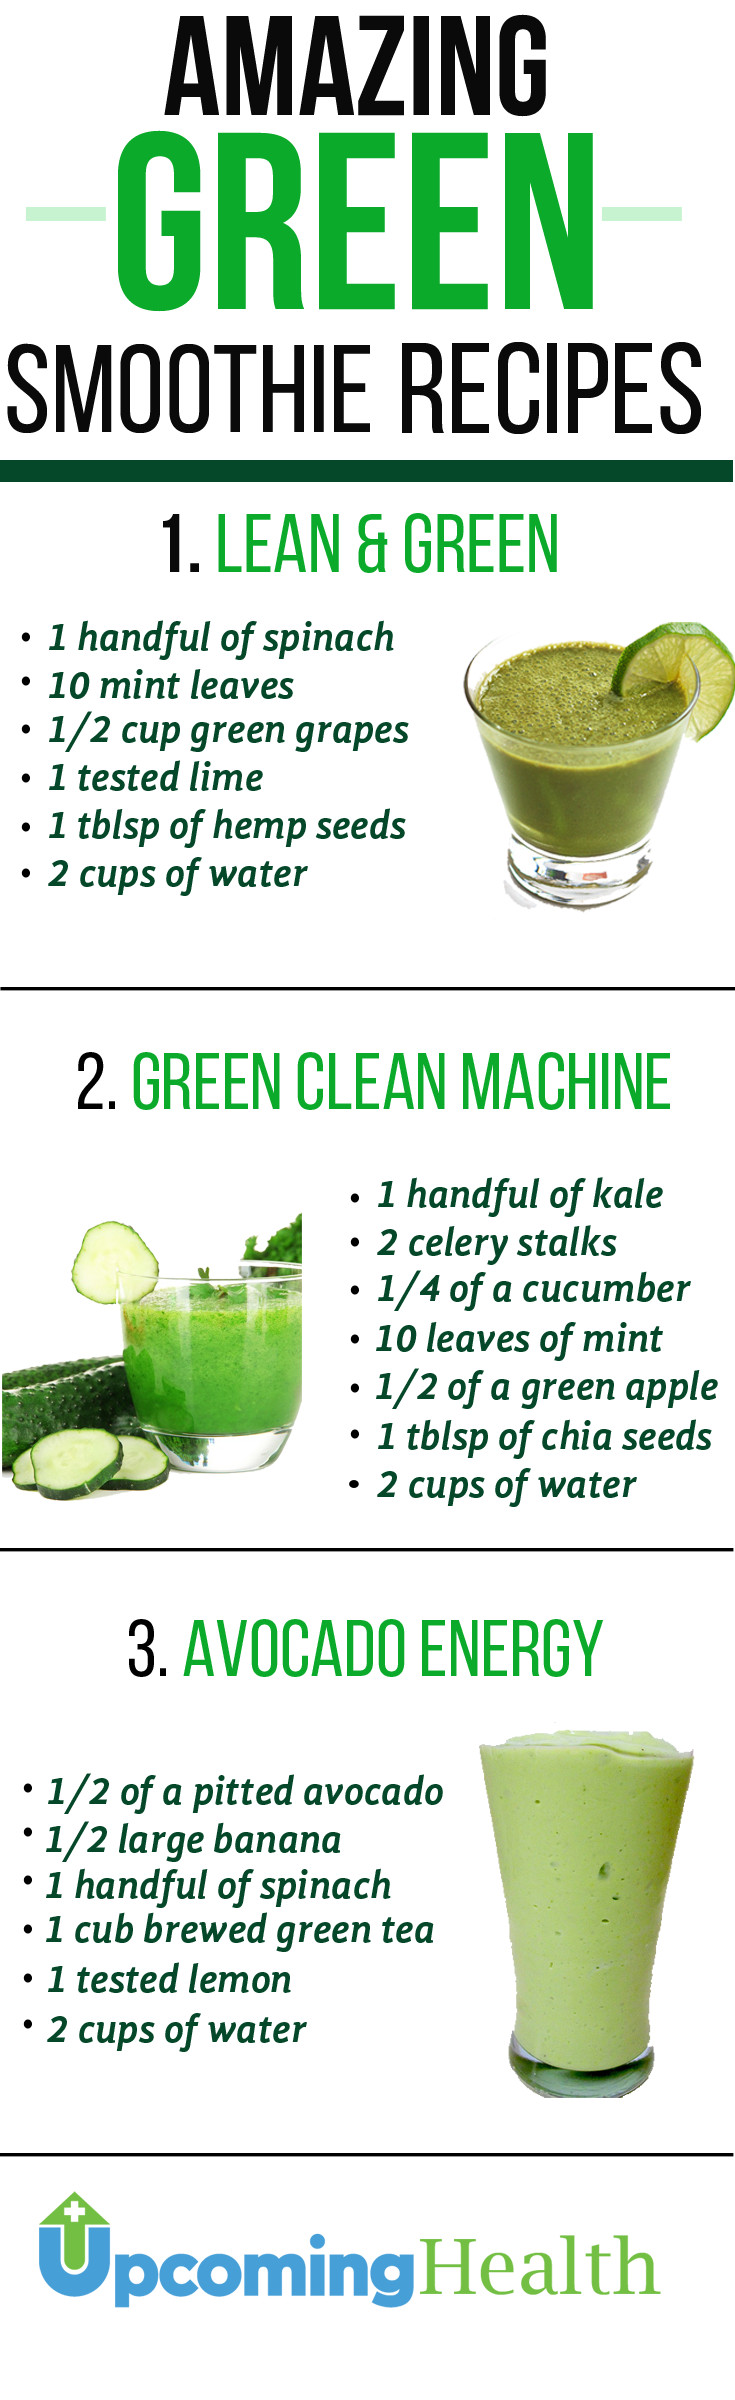 Green Smoothies Recipes
 Green Smoothies Will Revolutionize Your Health